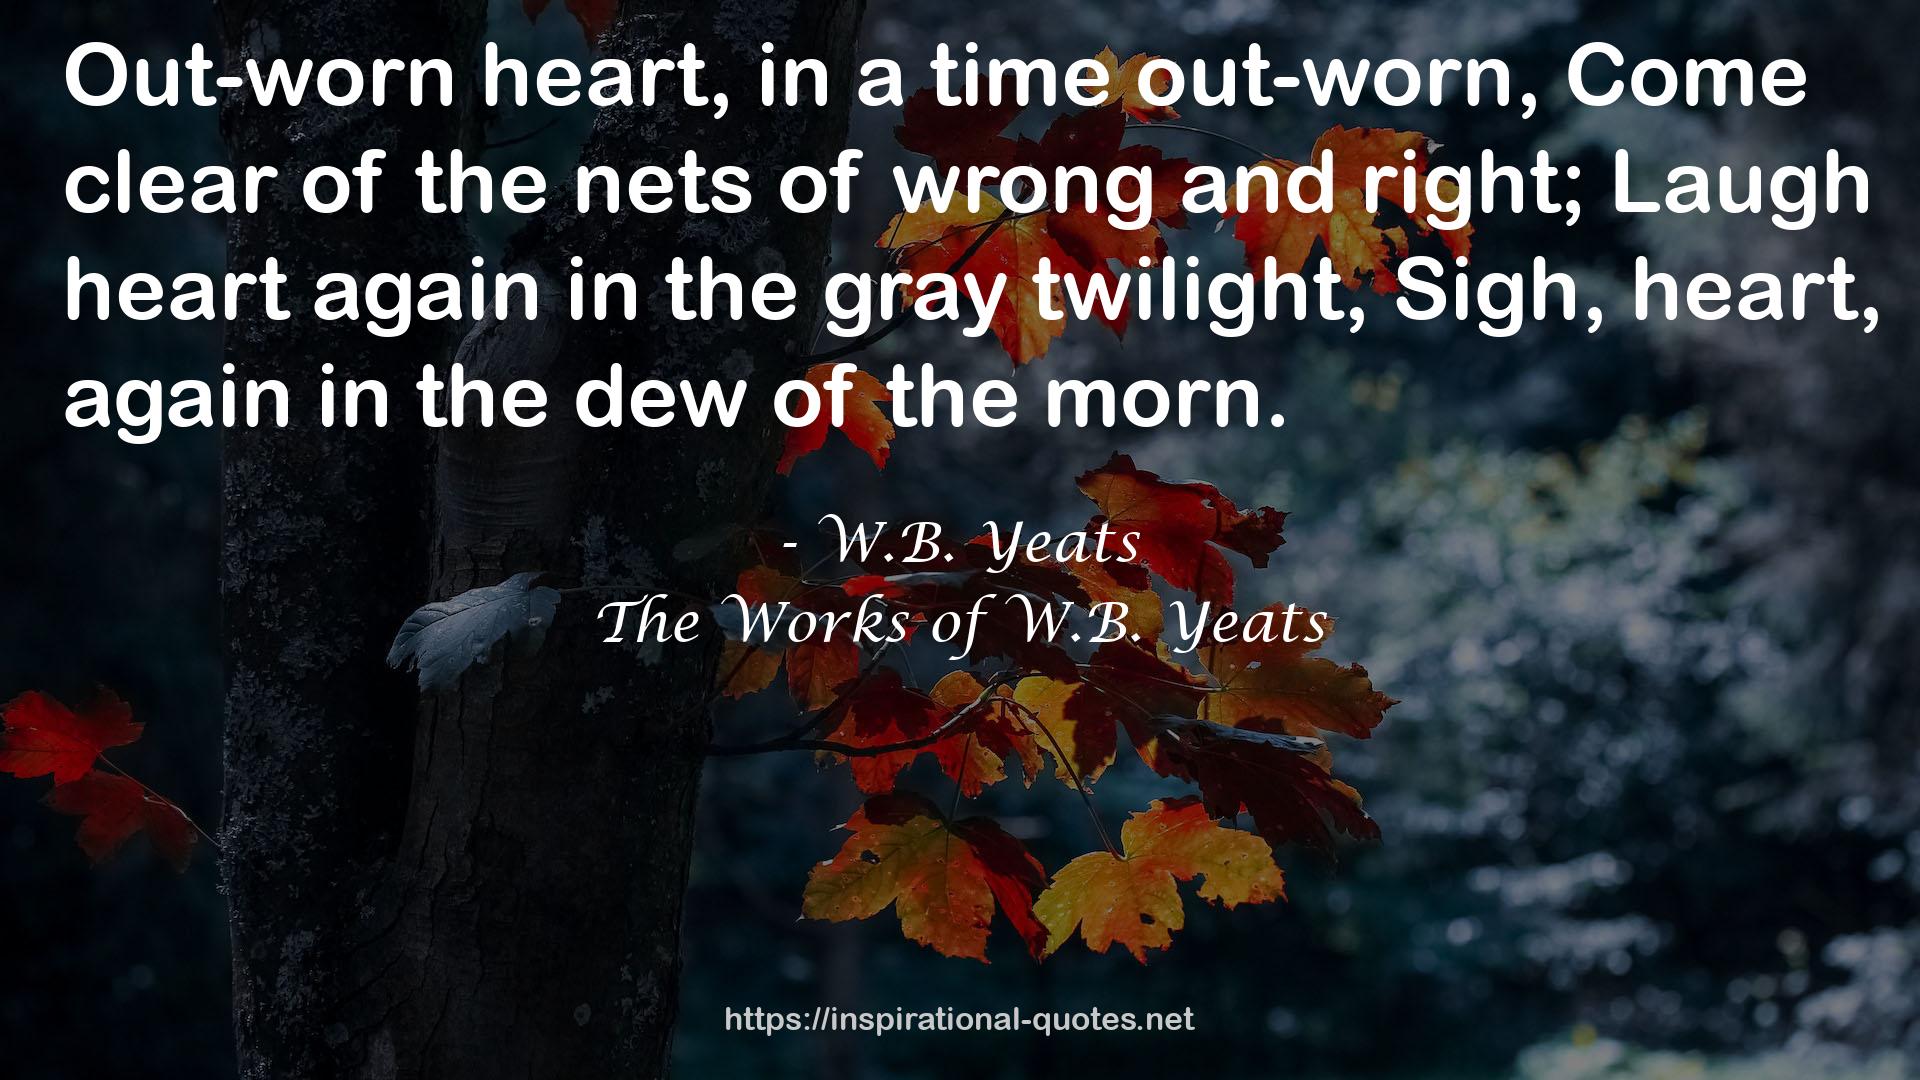 The Works of W.B. Yeats QUOTES